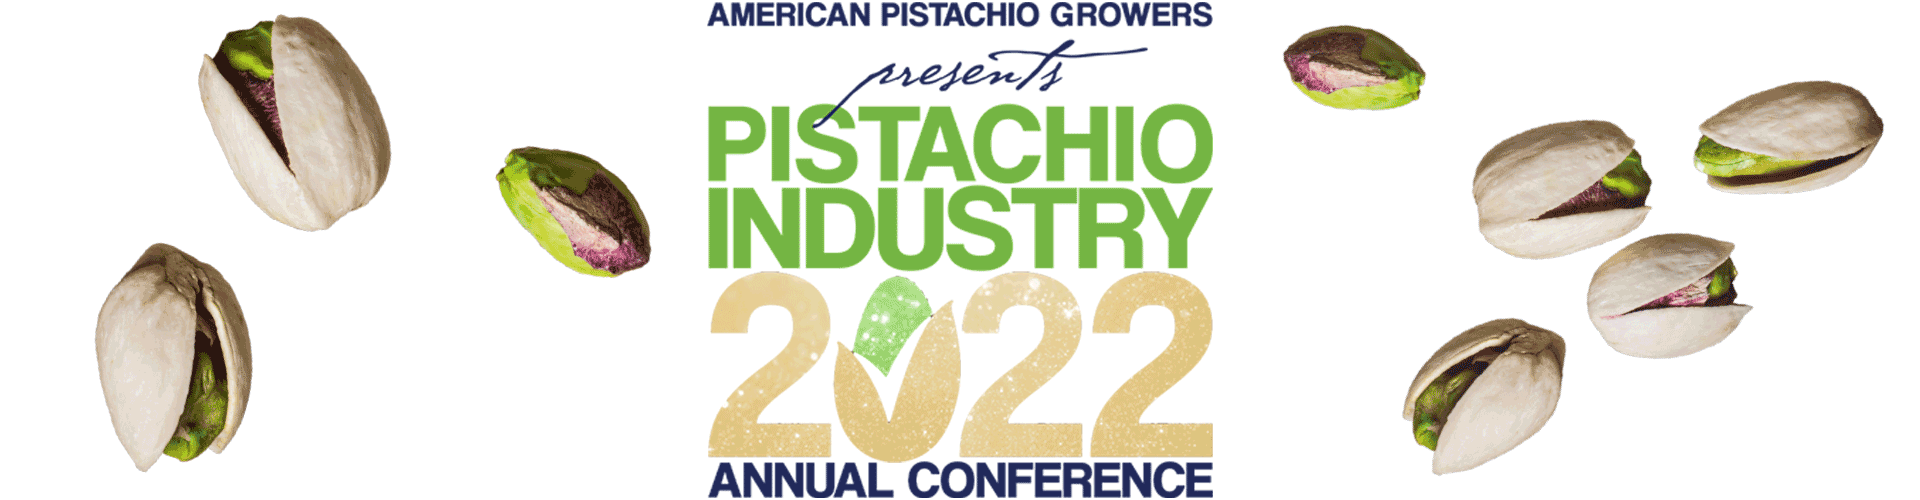 2022 American Pistachio Growers Annual Conference